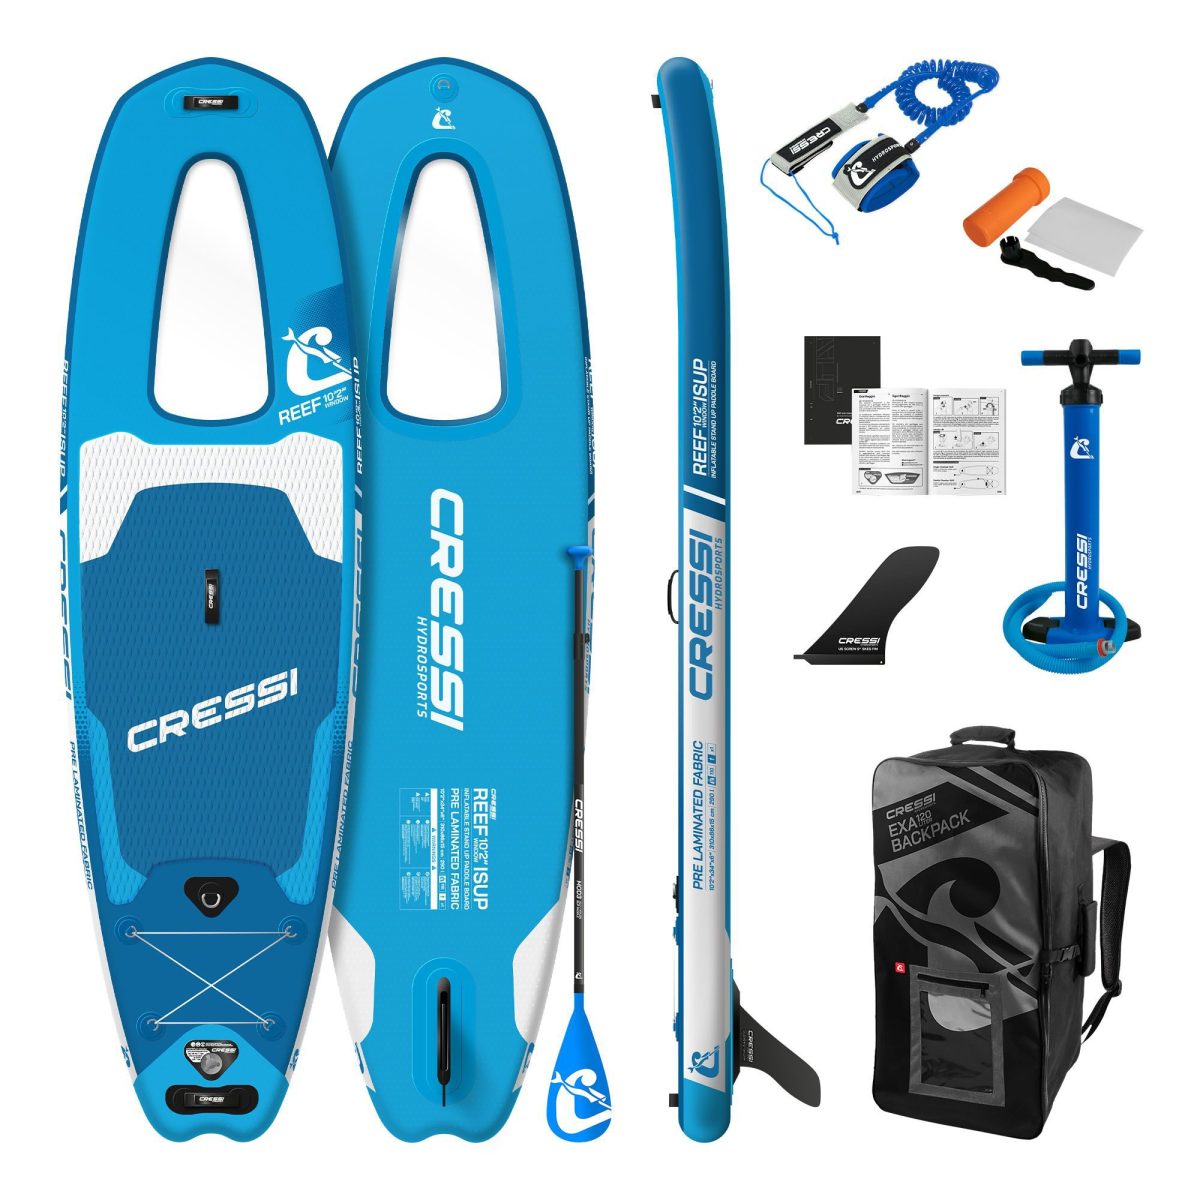 Cressi Reef Inflatable All Round Stand-Up Paddleboard Set